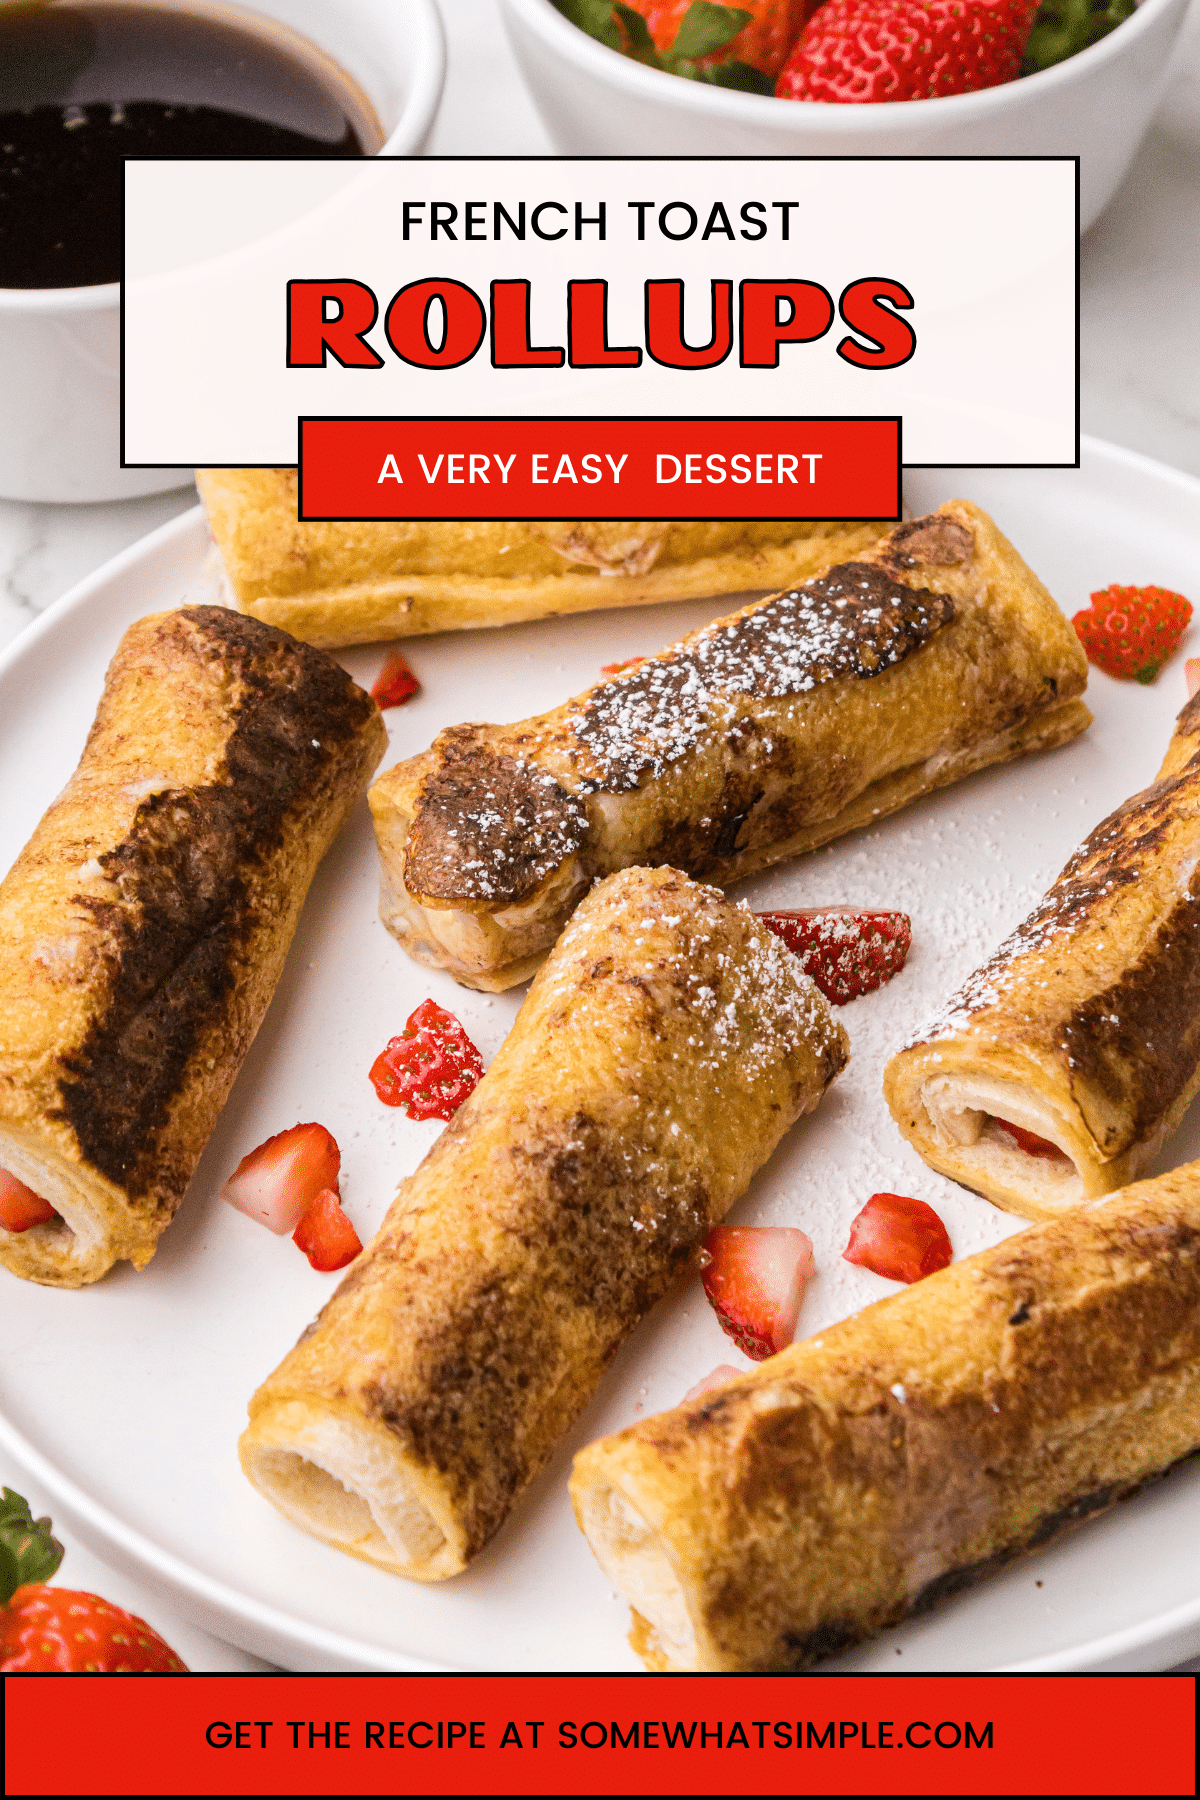 French toast rollups are golden brown on the outside and filled with a warm and gooey cream cheese and sweet strawberry filling. Everyone loves this twist on the classic French toast, whether plain or finished with a dusting of powdered sugar and a drizzle of maple syrup! via @somewhatsimple